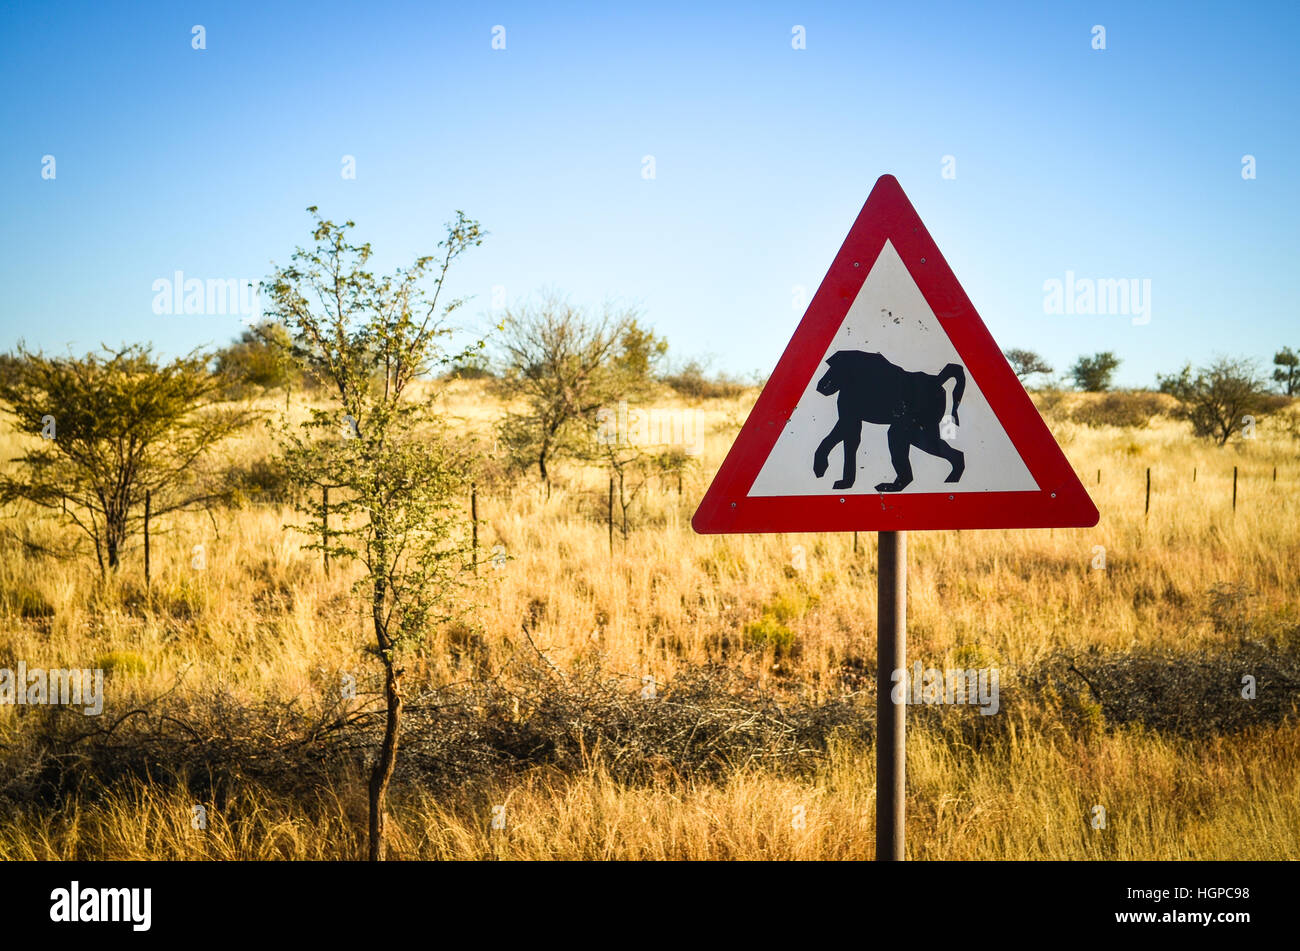 Road sign warning for monkeys in Namibia Stock Photo